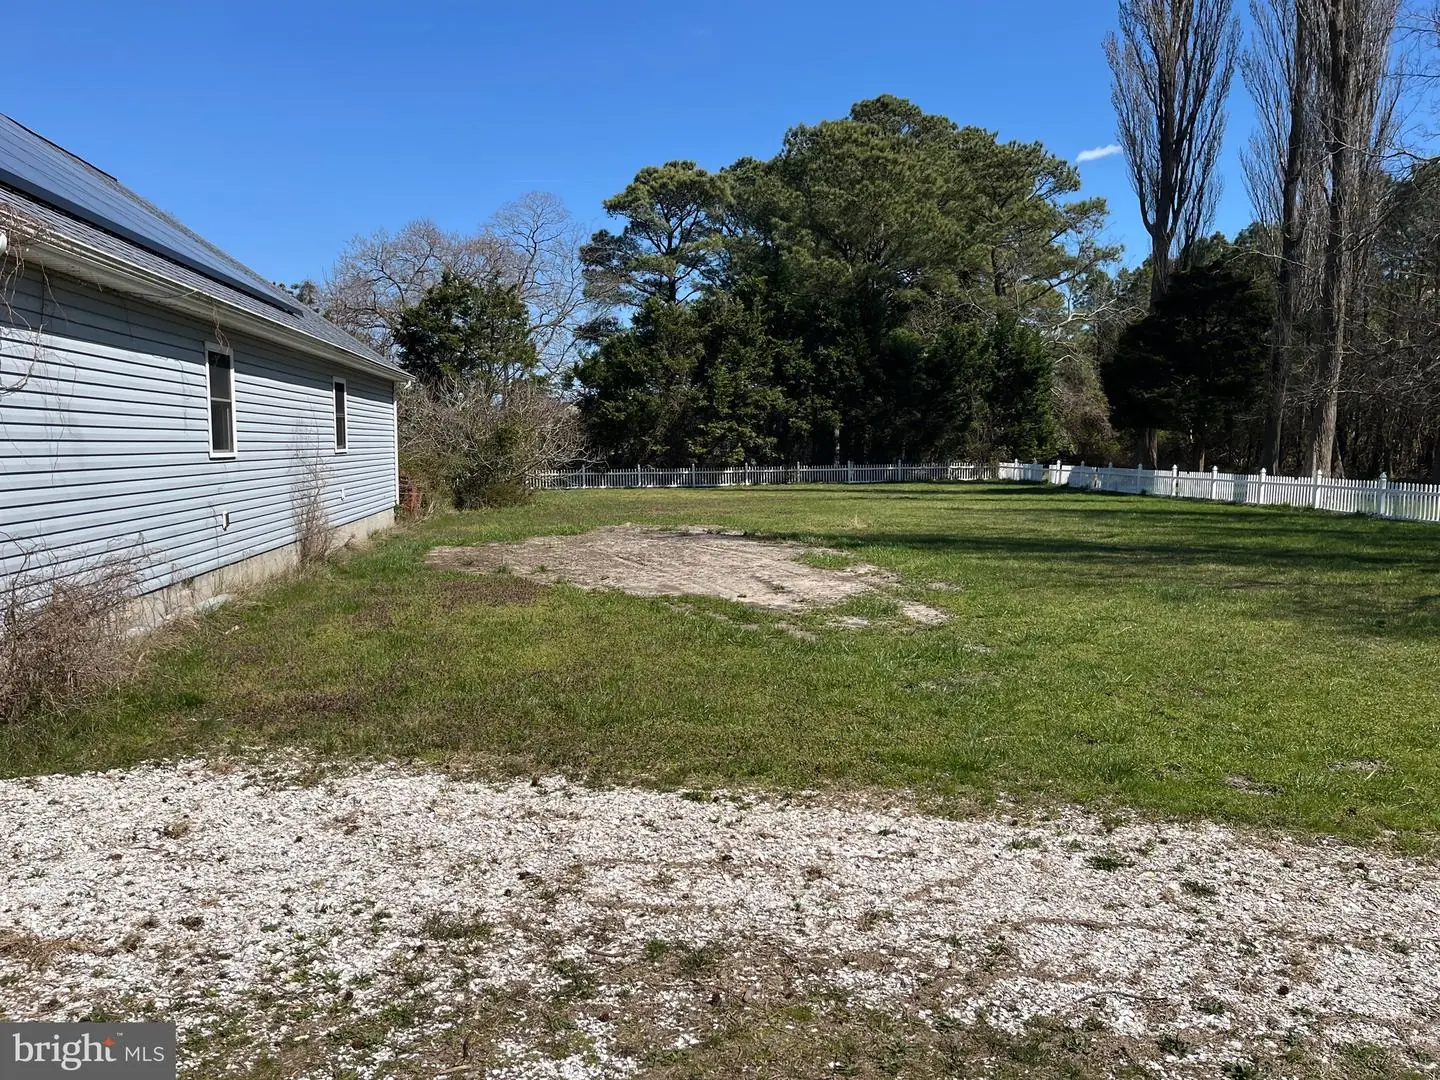 MDSO2004392-802940001706-2024-04-05-00-17-09 11513 Hodson White Rd | Deal Island, Md Real Estate For Sale | MLS# Mdso2004392  - Keti Lynch